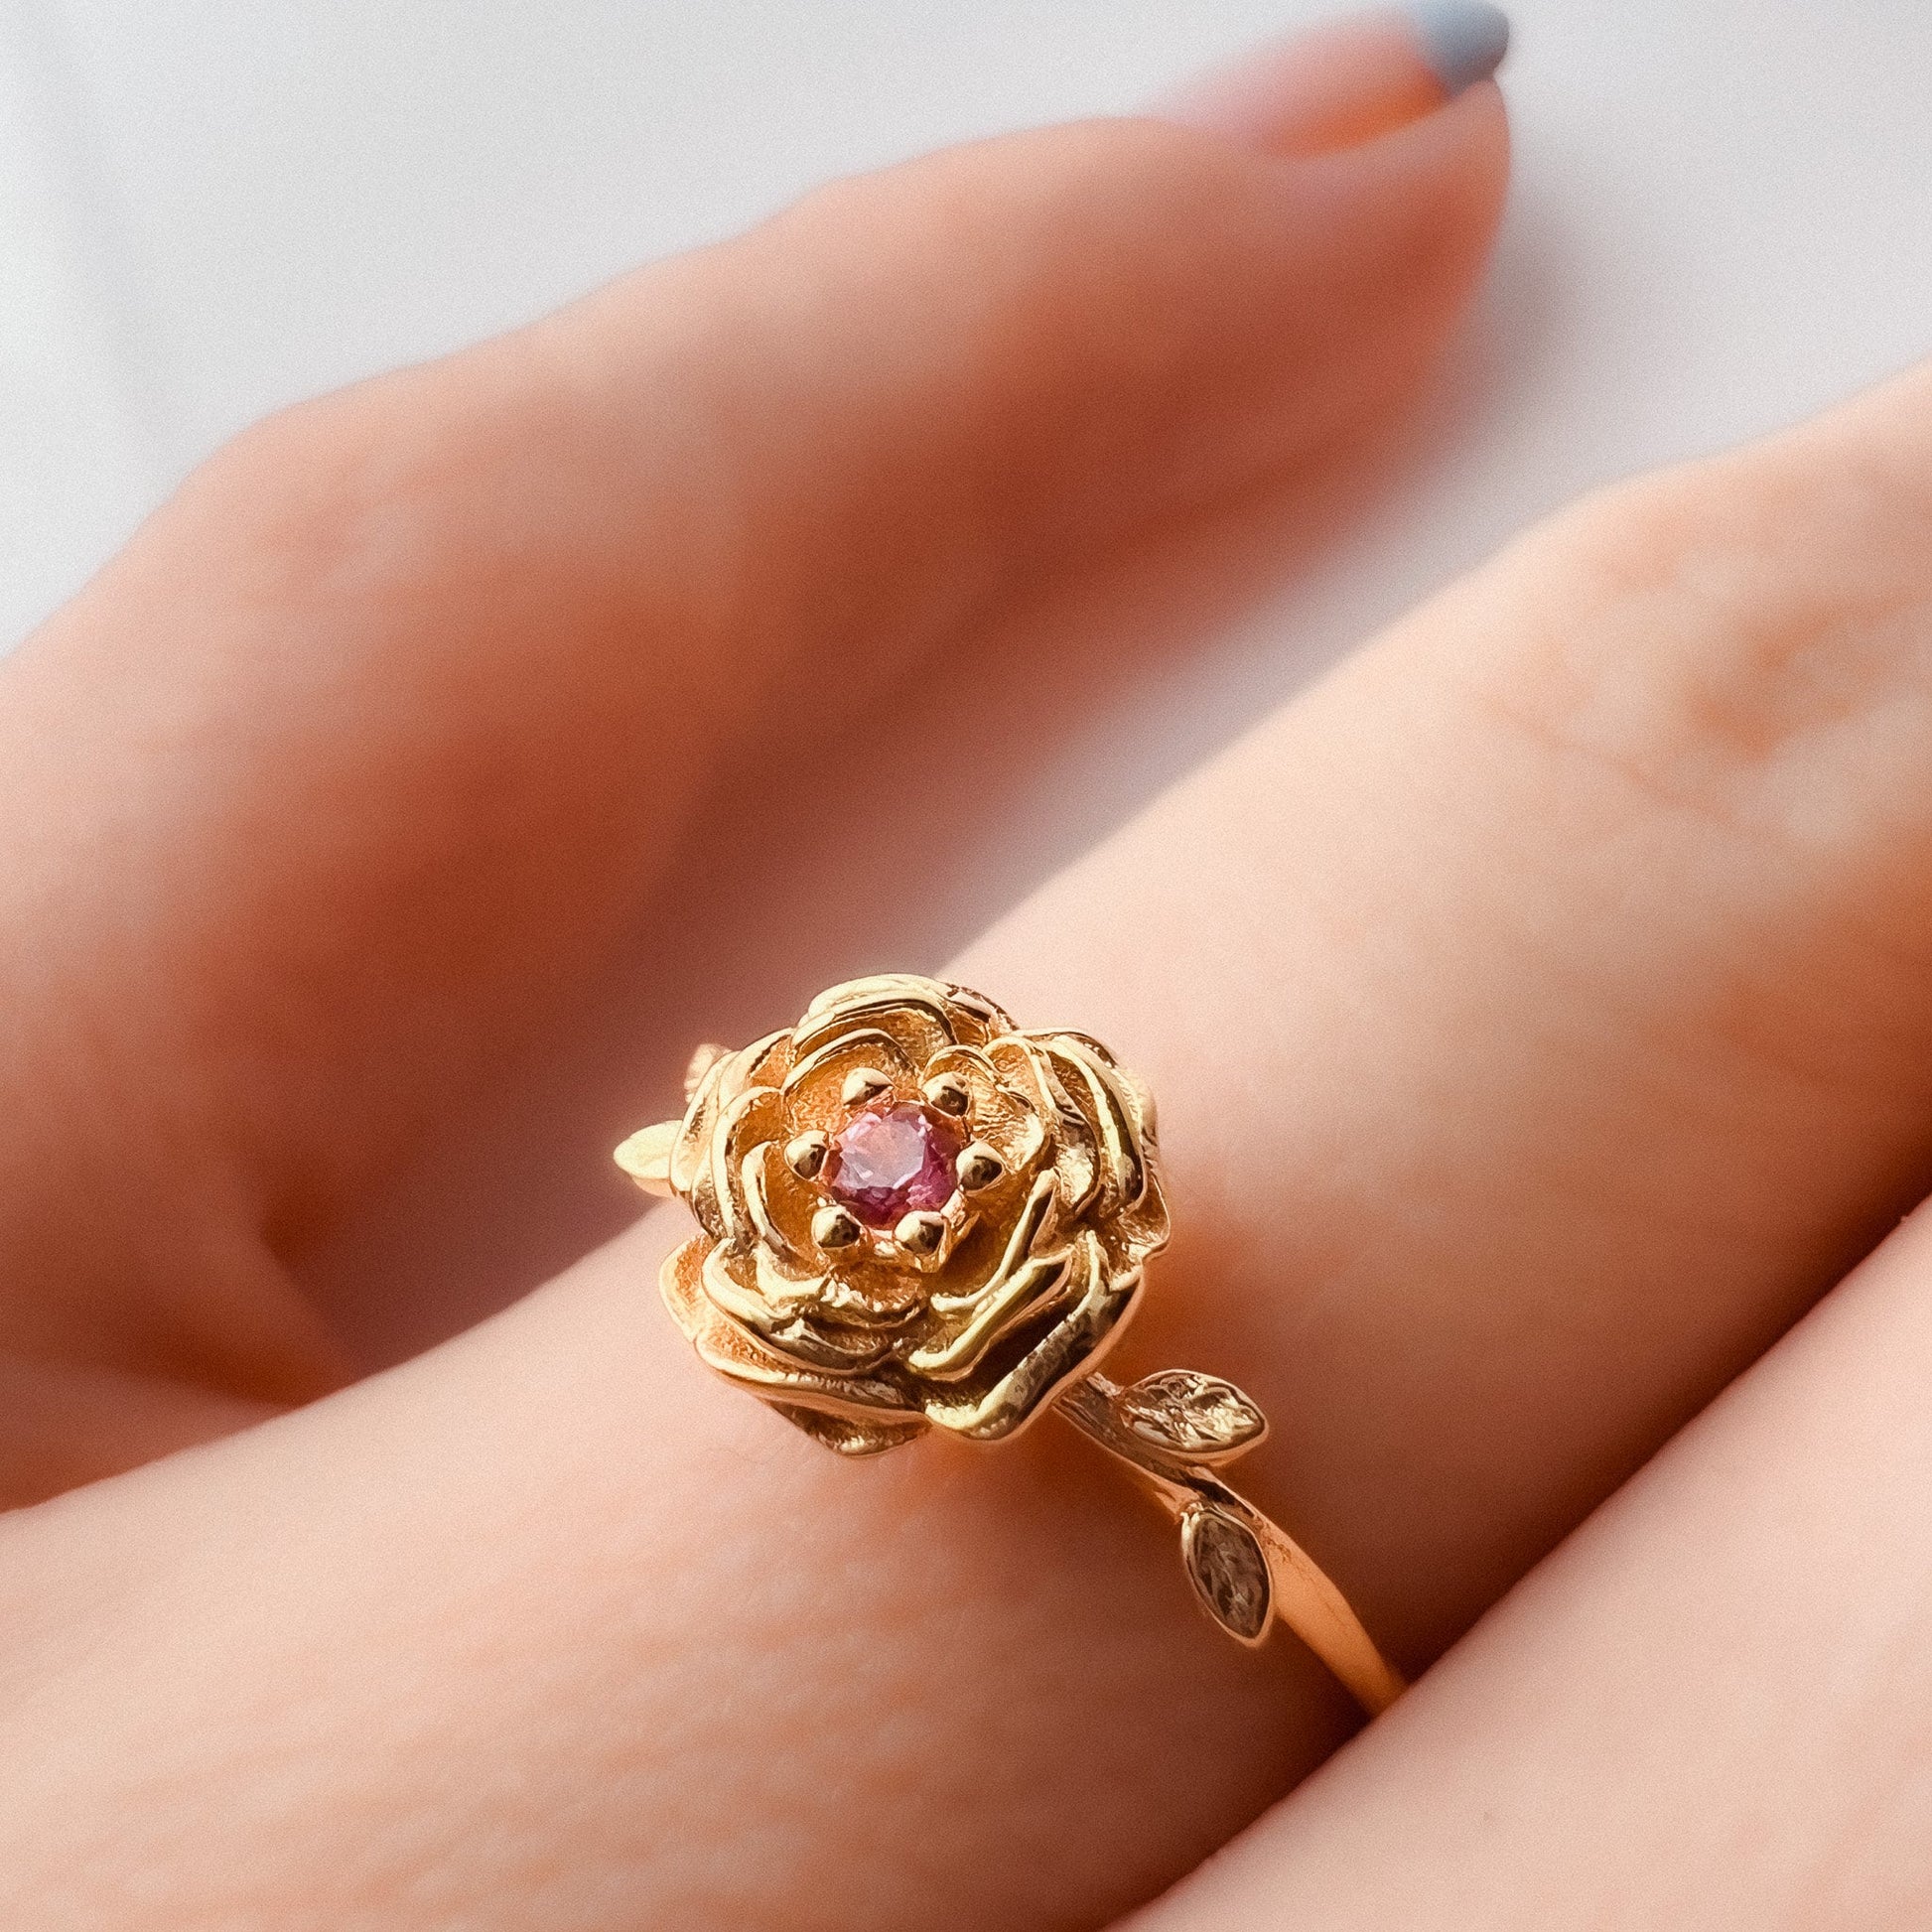 Marigold • October Birth Month Flower Ring • 2mm Pink Tourmaline • Solid Gold or Solid Silver • Ameliarrayjewelry